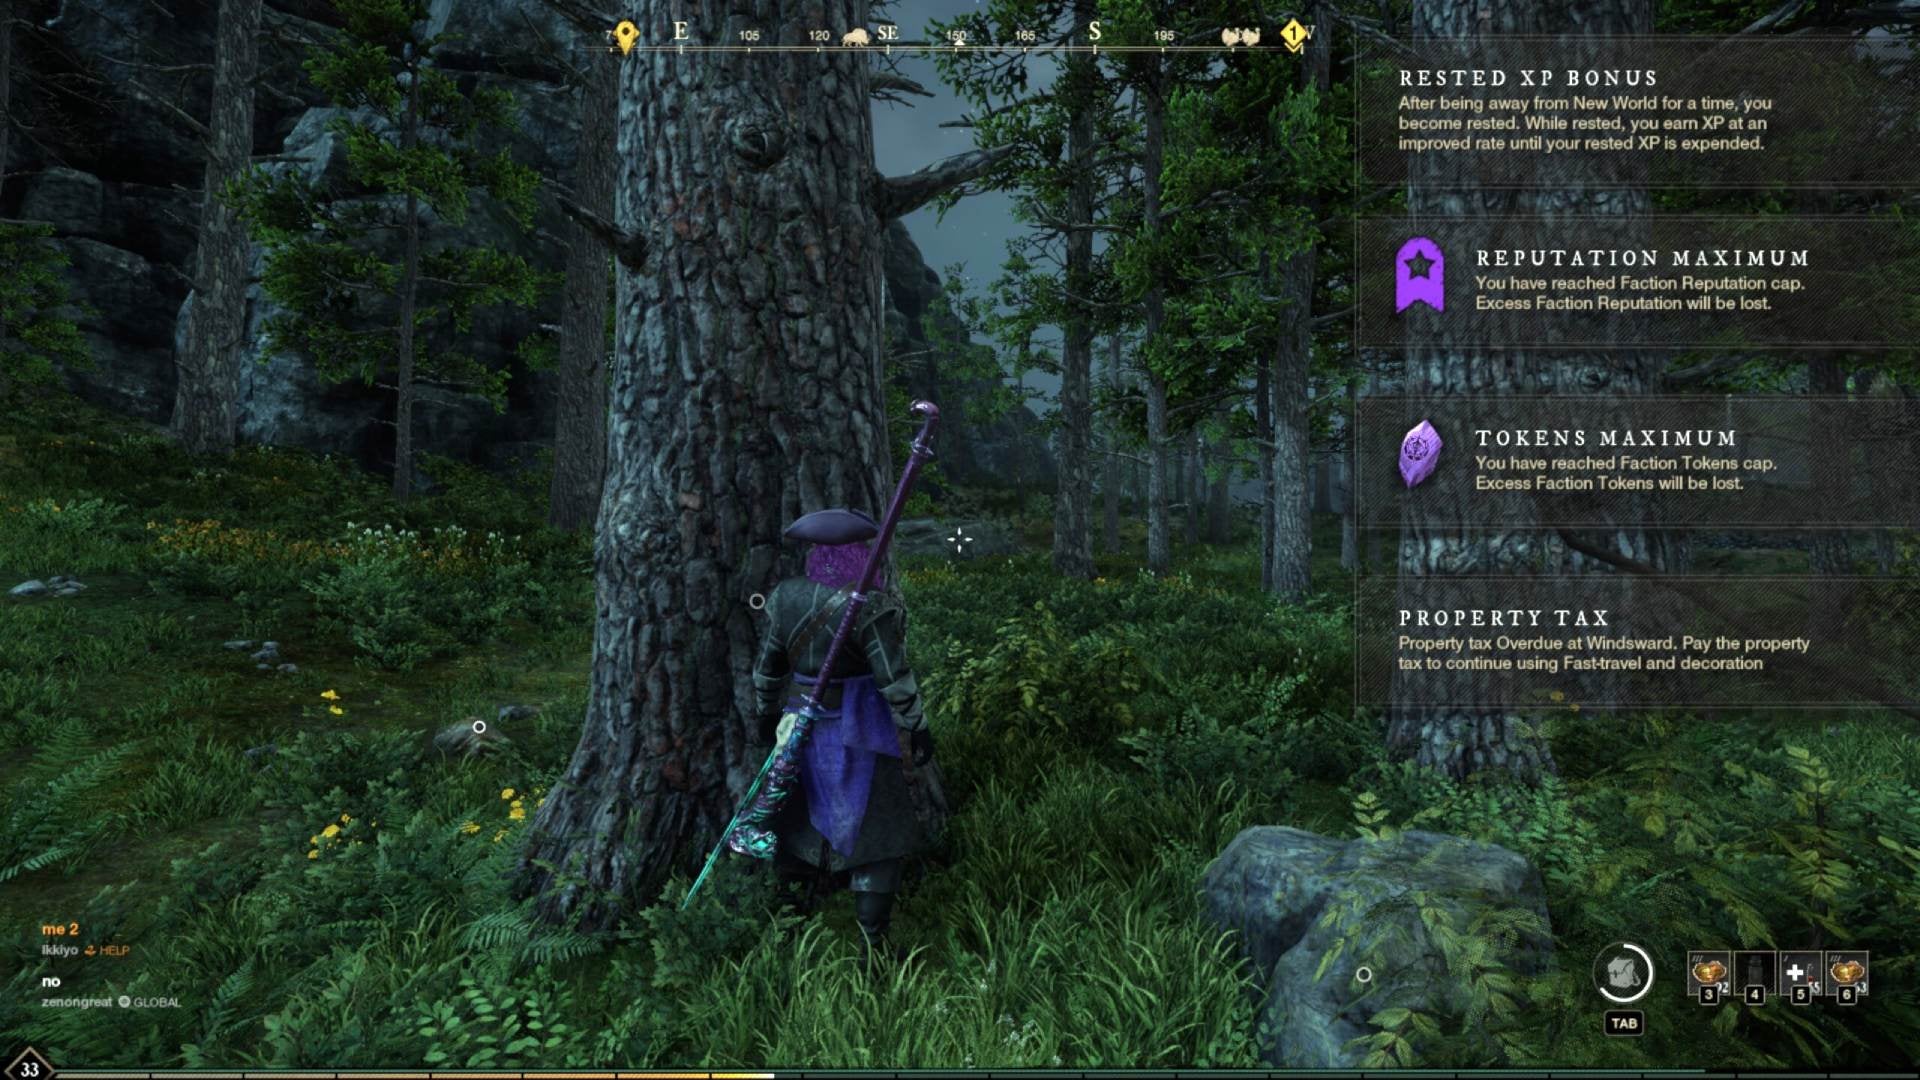 I'd Blair Witch in a forest if I had to pay property tax in a video game too.  (Screenshot: Kotaku / Amazon Games)